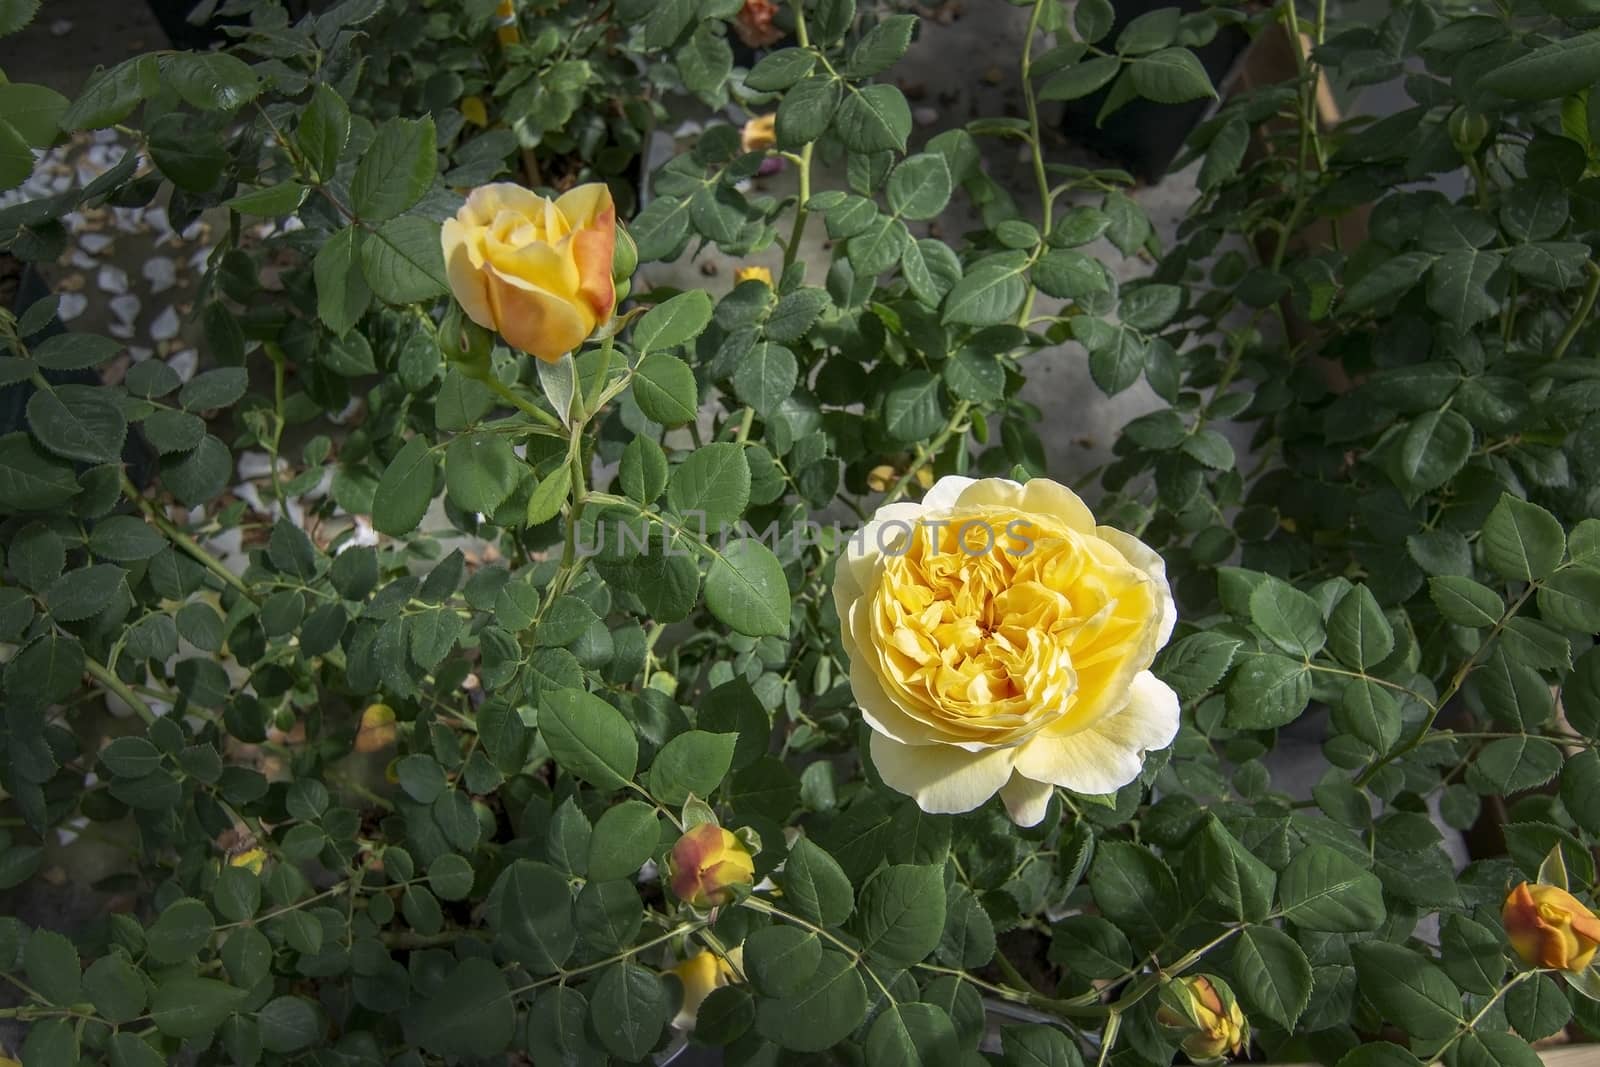 Gorgeous double yellow rose flowers in pots. Spring garden series, Mallorca, Spain.